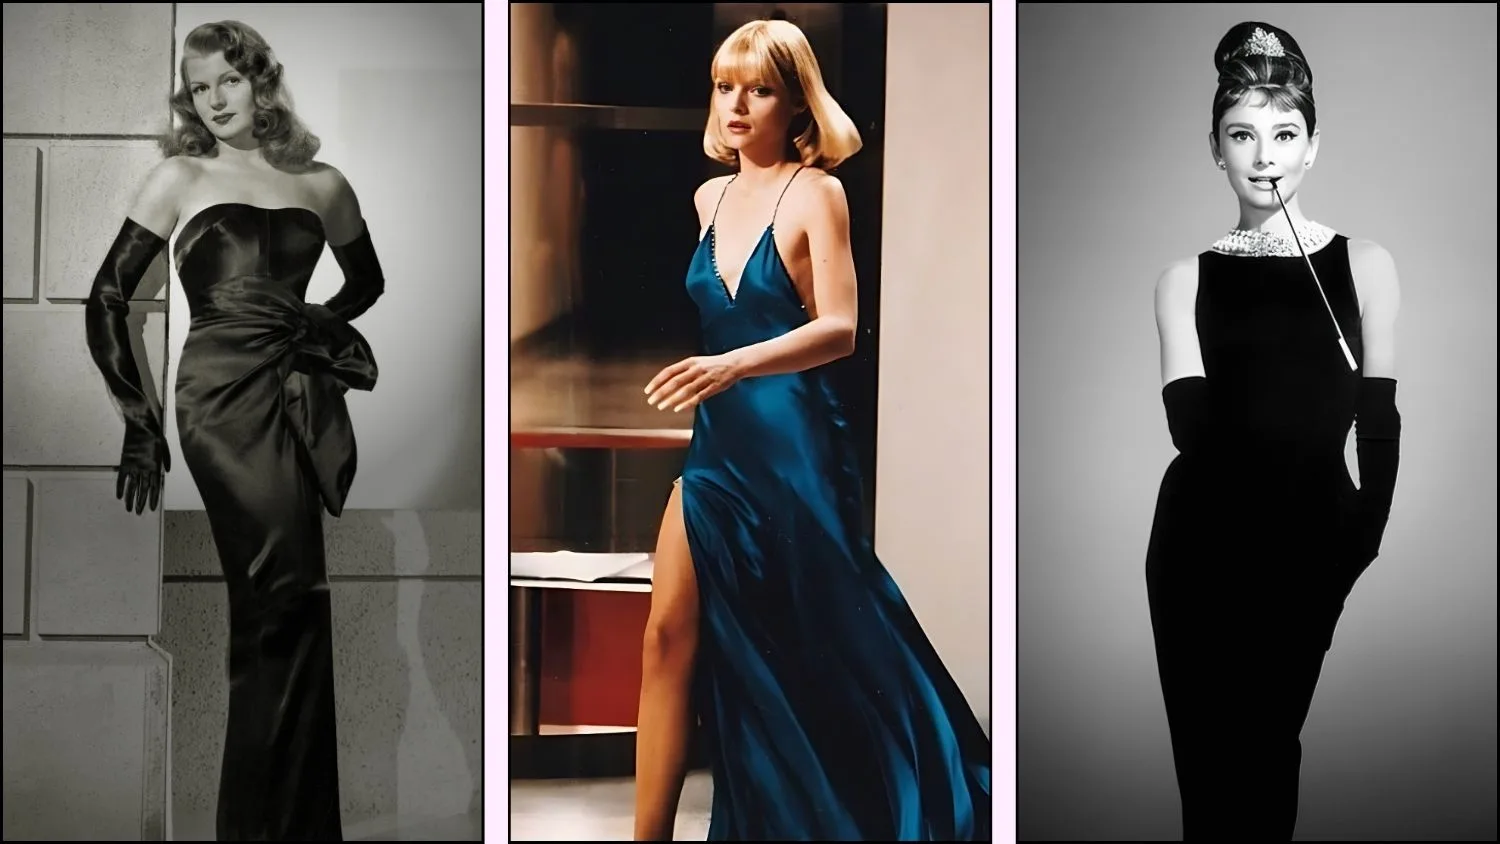 A collage of famous movie dresses